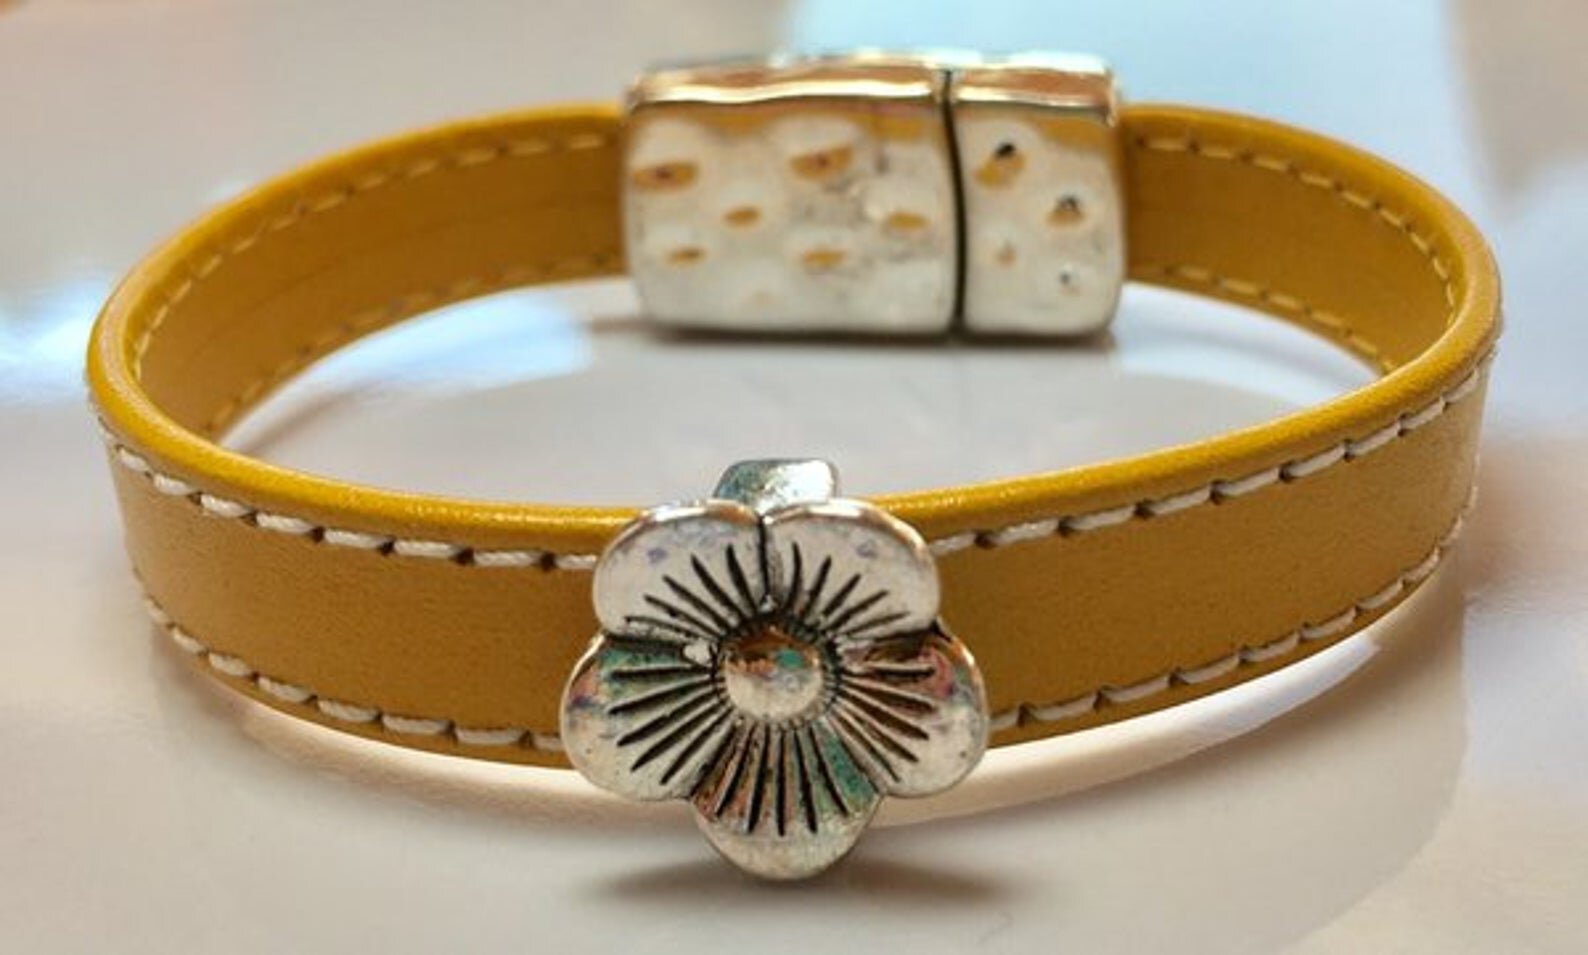 Pellarte Stitched Italian Leather Bracelet with Buttercup Bead and Hammered  Magnetic Clasp - 3/8 Wide — Pellarte Jewelry